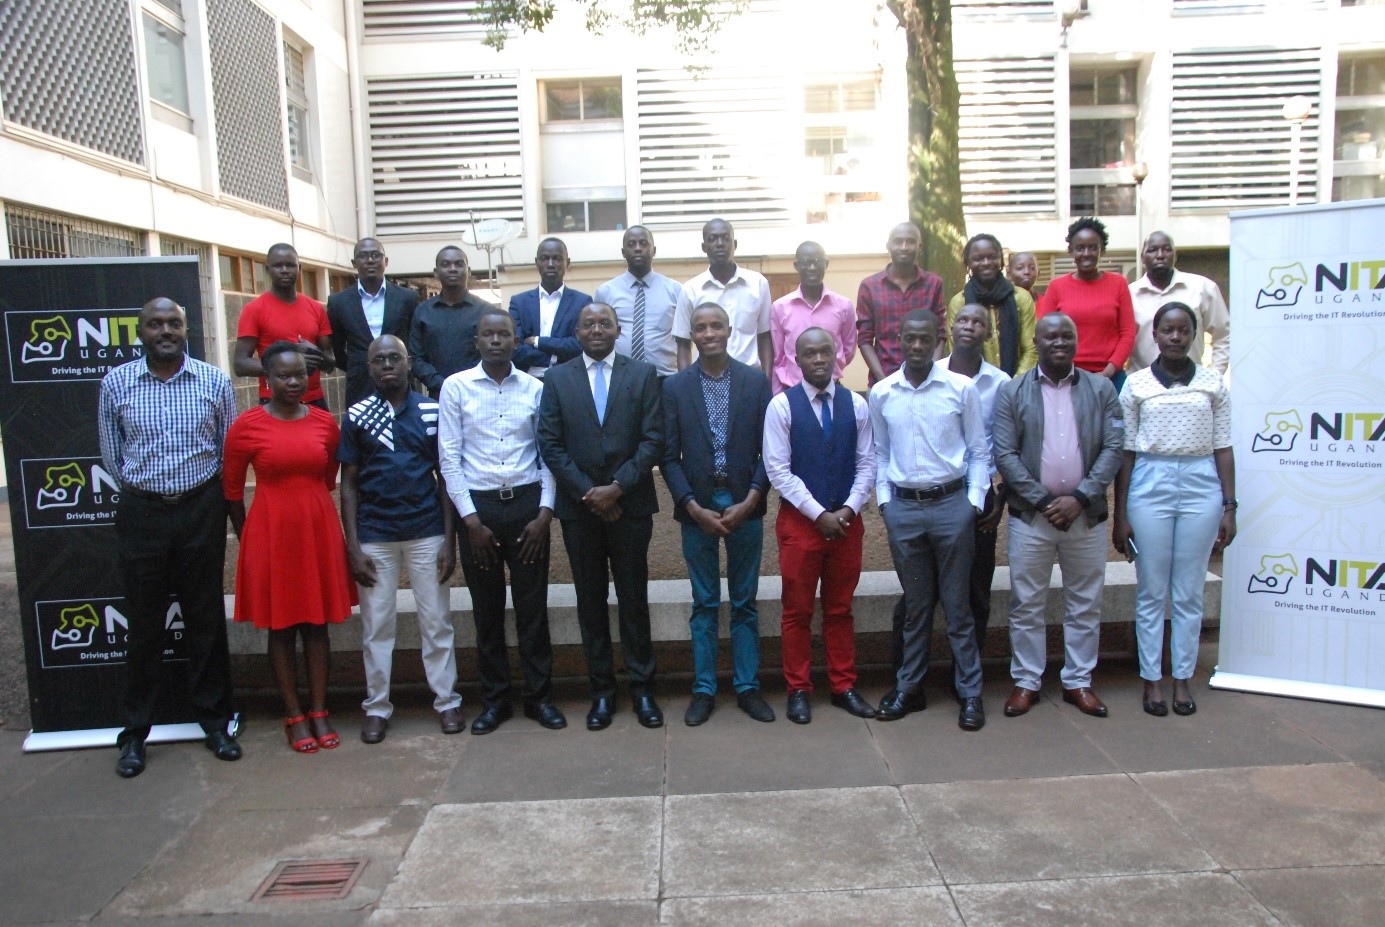 Journalists from Print, Radio, Television and Online media houses pose for a group photo with the NITA-U team at the Information Access Center in Kampala on Tuesday 26th, February 2018 during their training program on Cyber security.